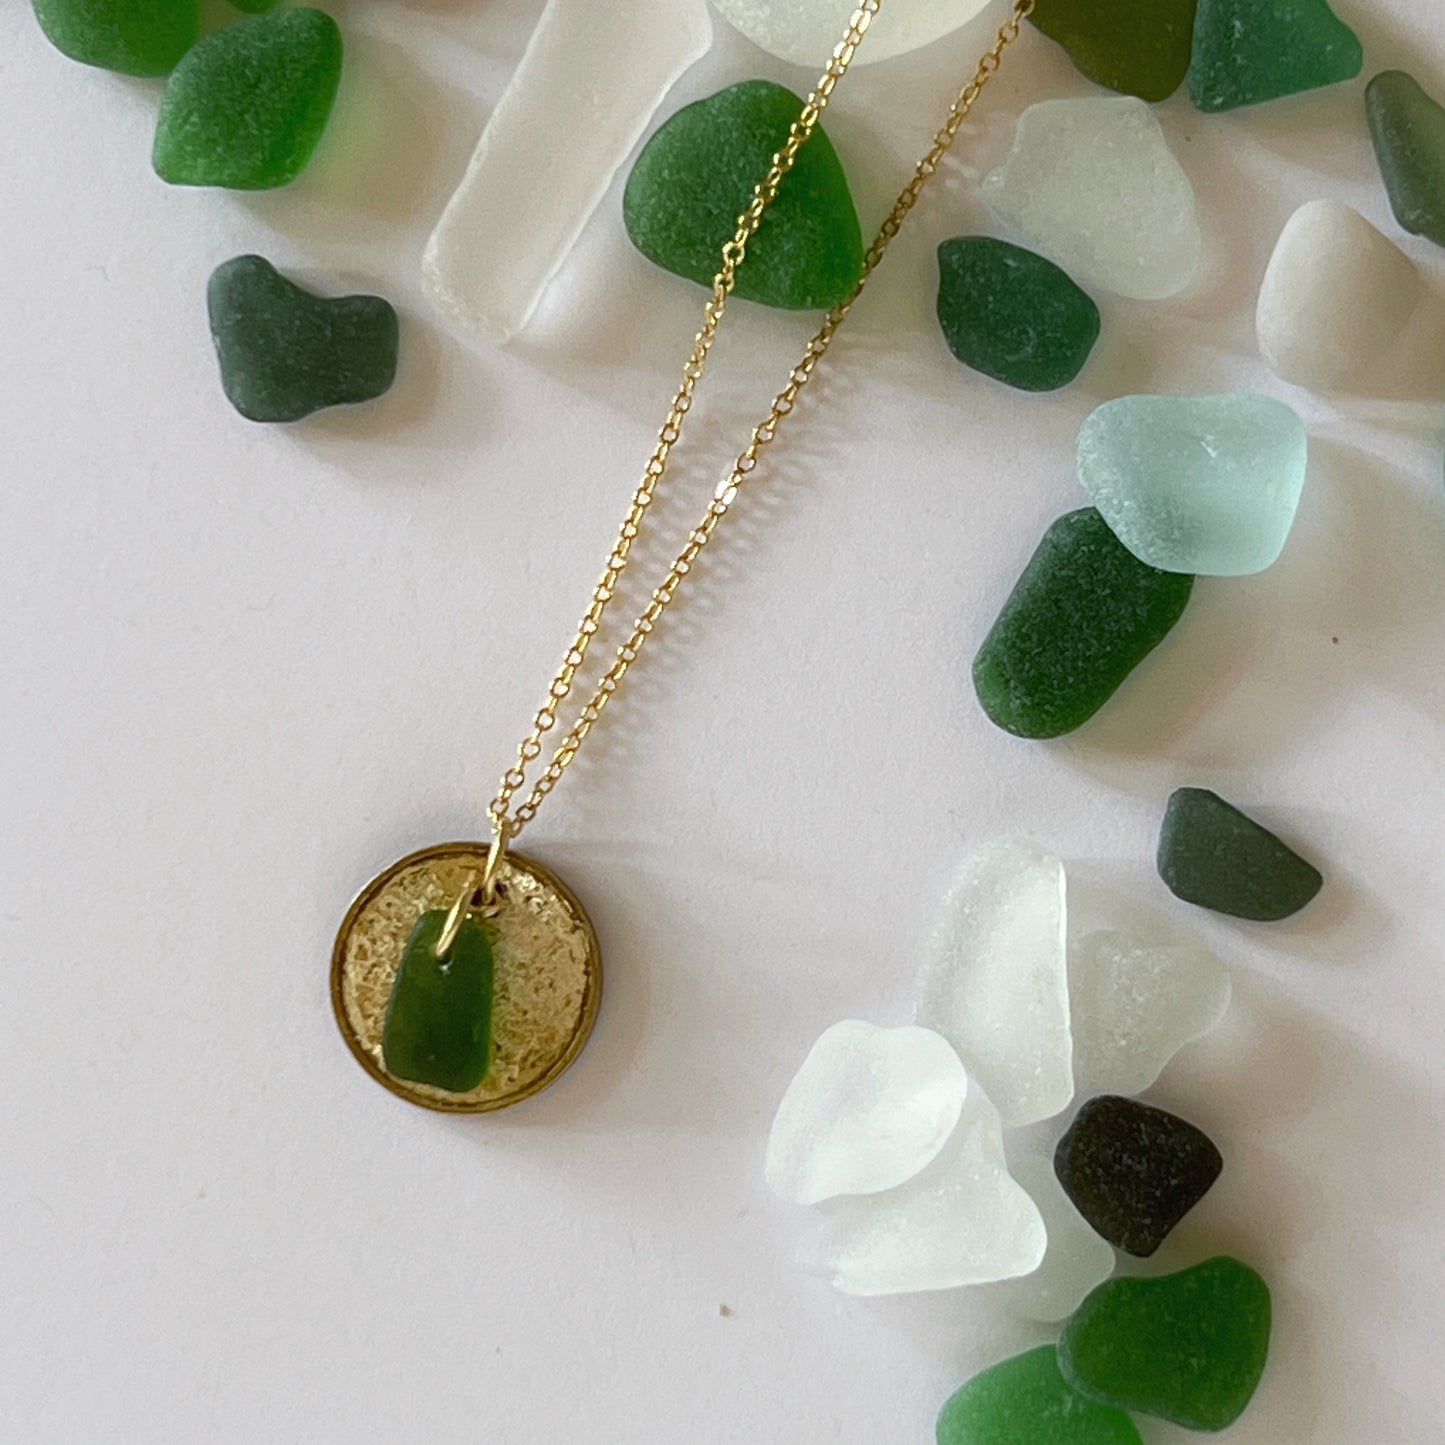 Mermaid Coin and Sea Glass Necklace (Portugal)